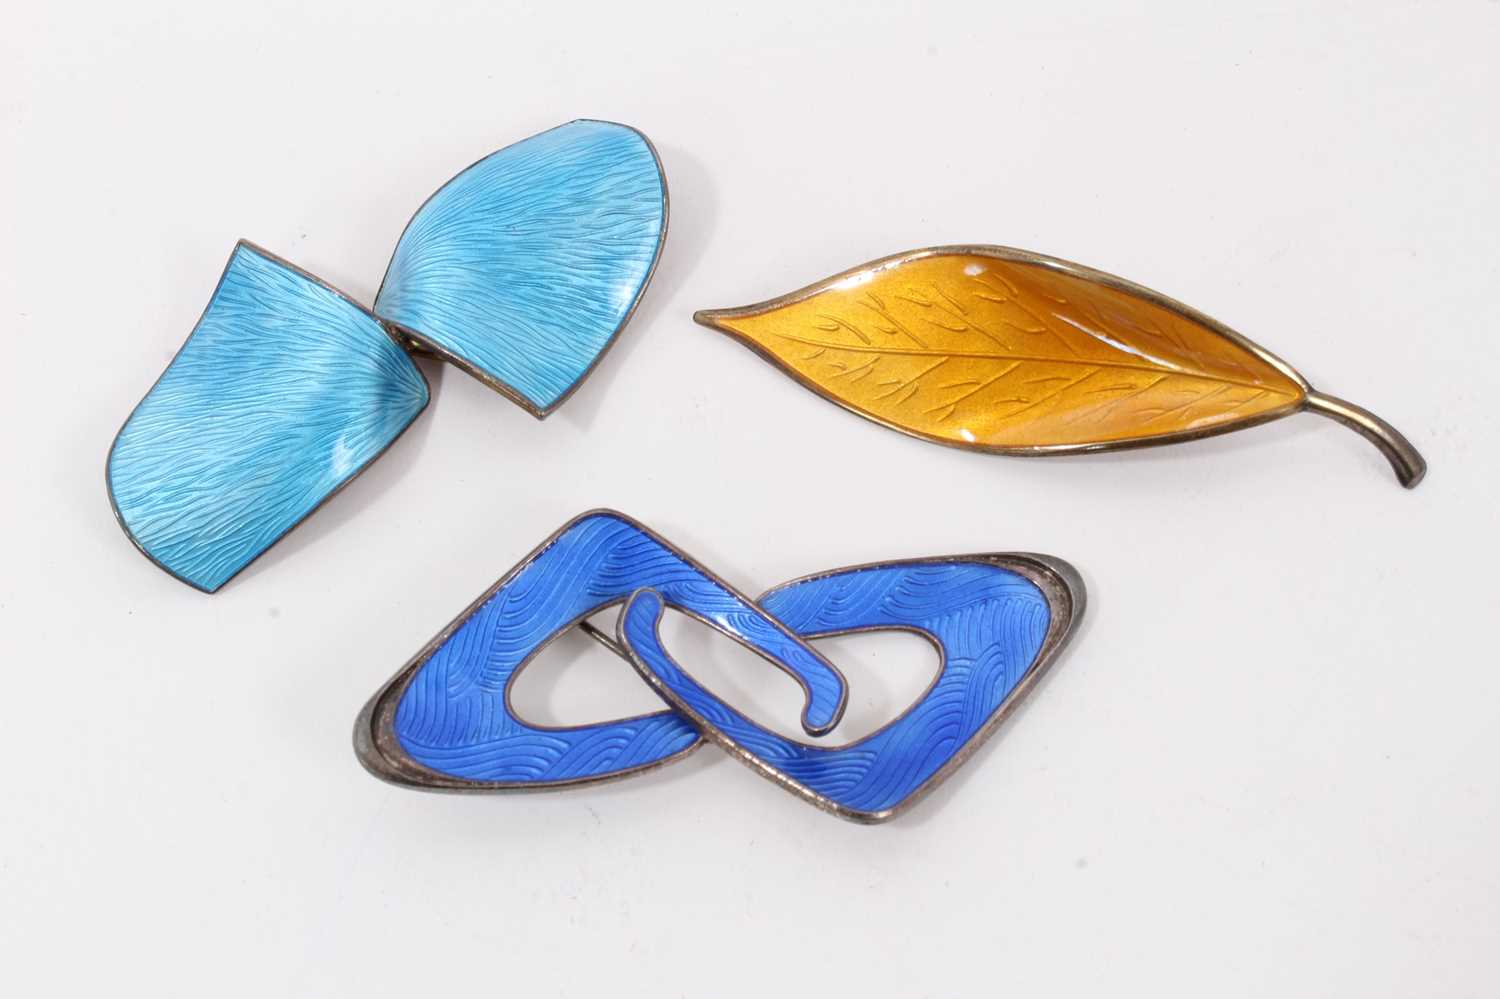 Three Norwegian silver and enamel brooches